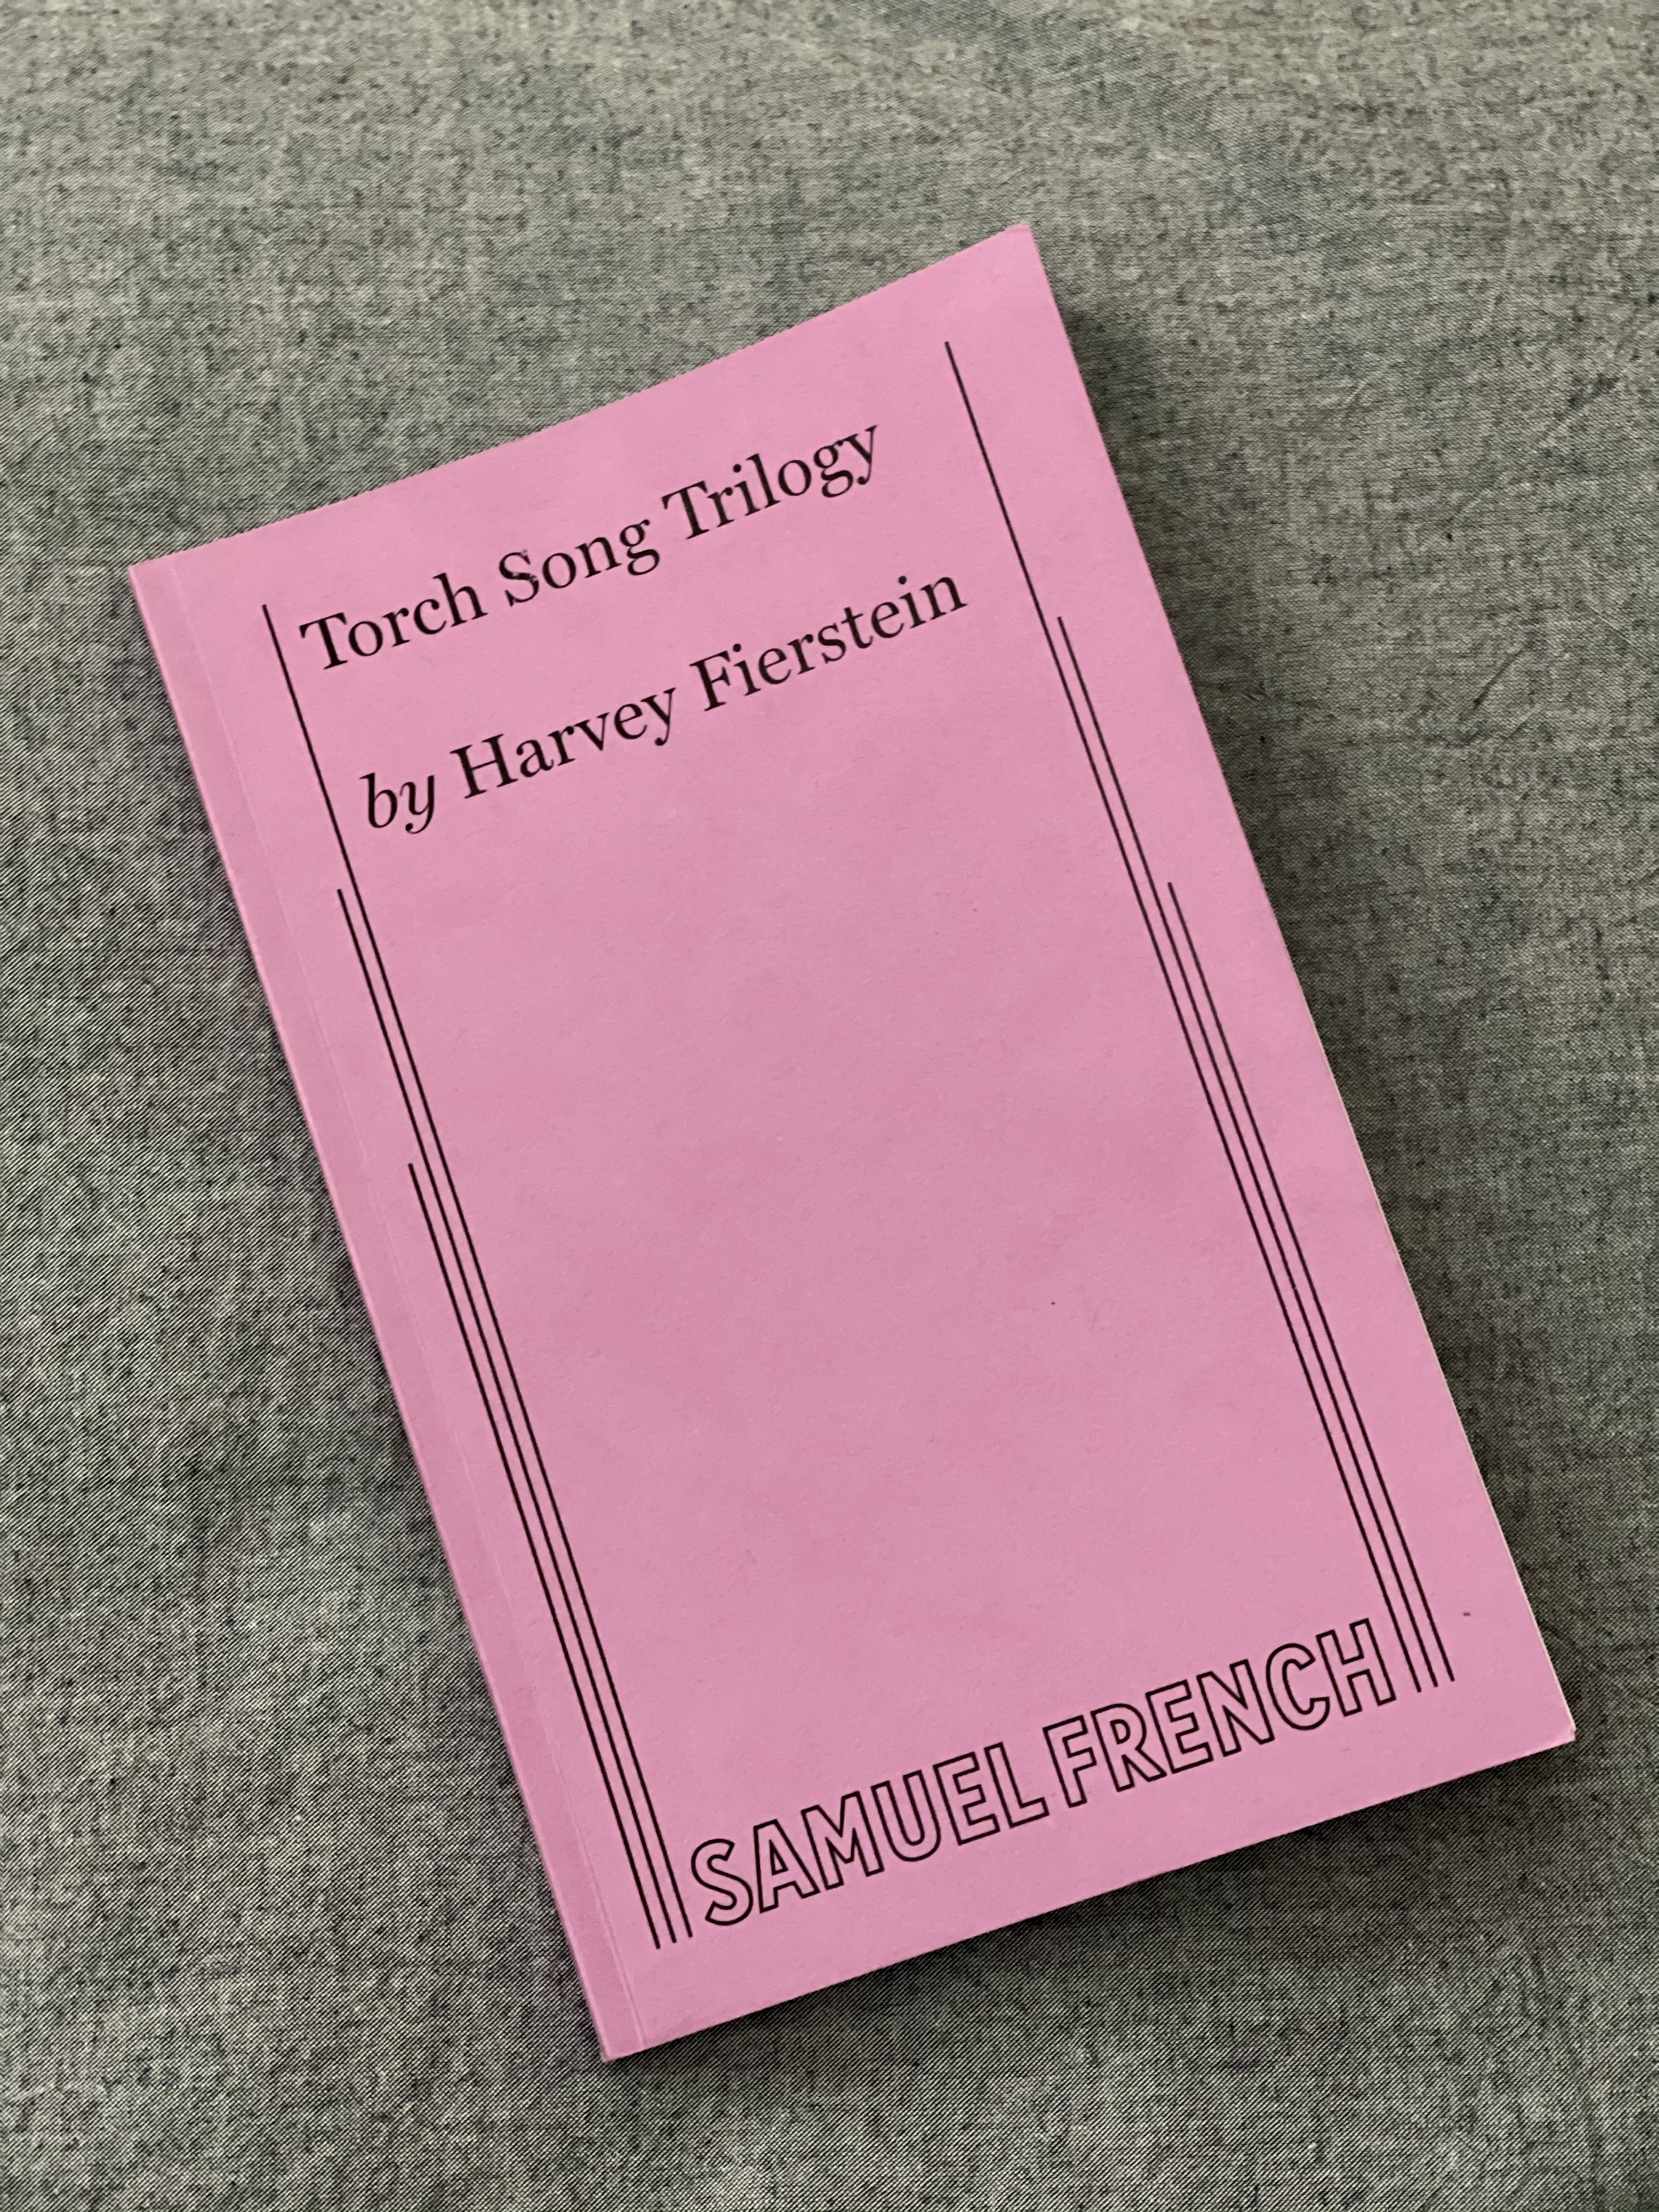 pink play book, showing title Torch Song Trilogy